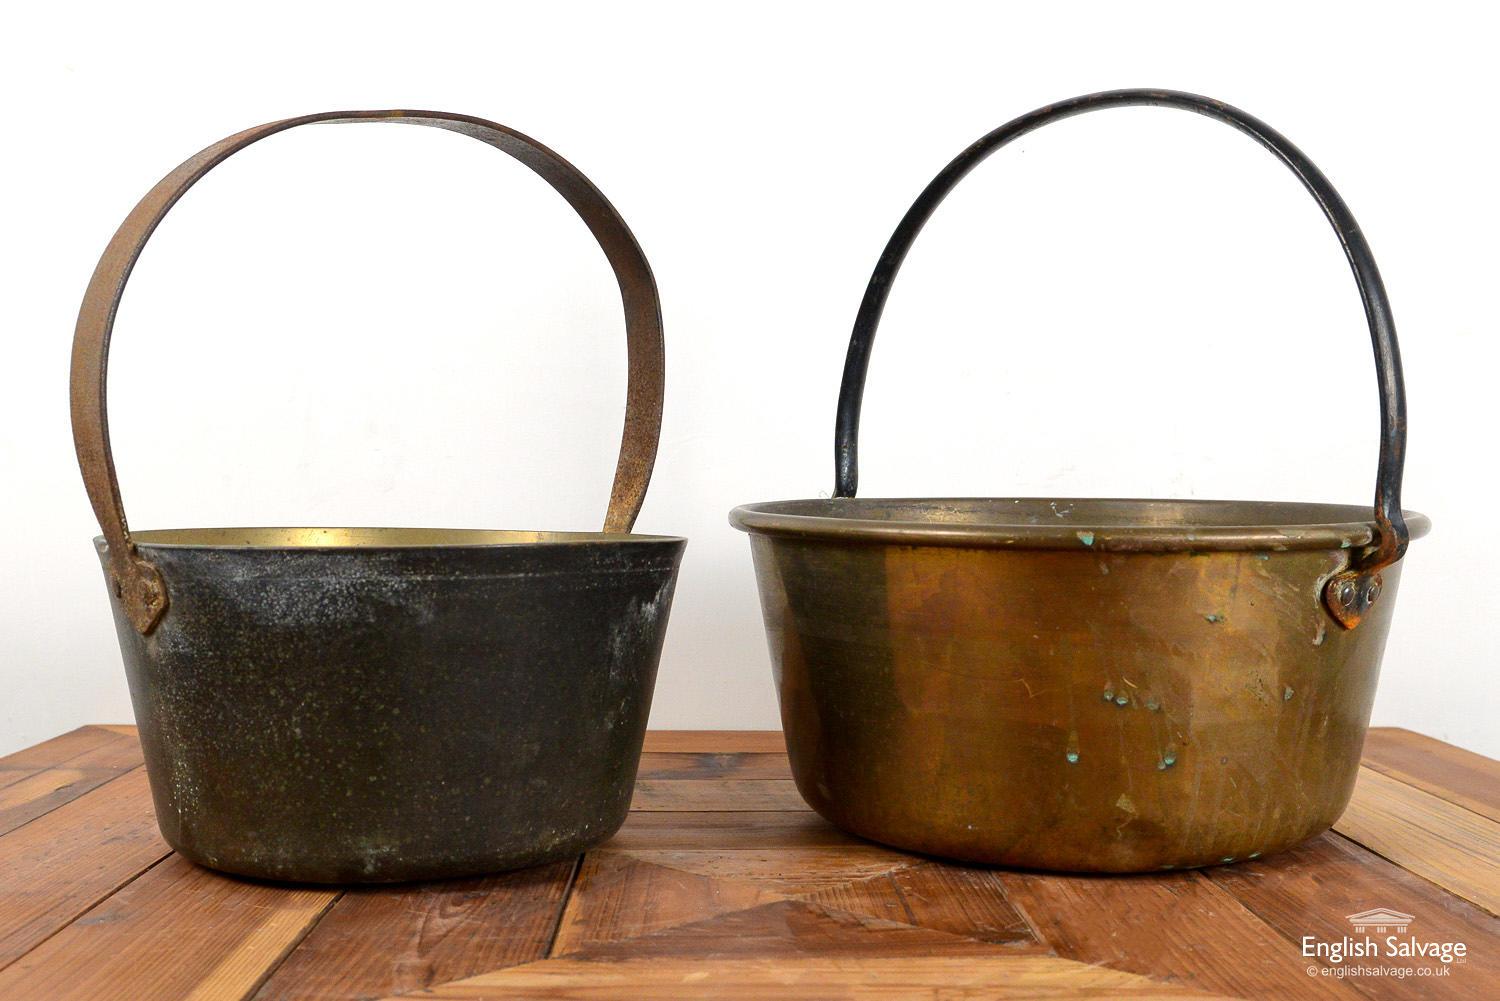 The smaller jam pot is 32cm diameter and the larger pot is 35.5cm diameter. Some rust, knocks and tarnishing to both, as expected with age.